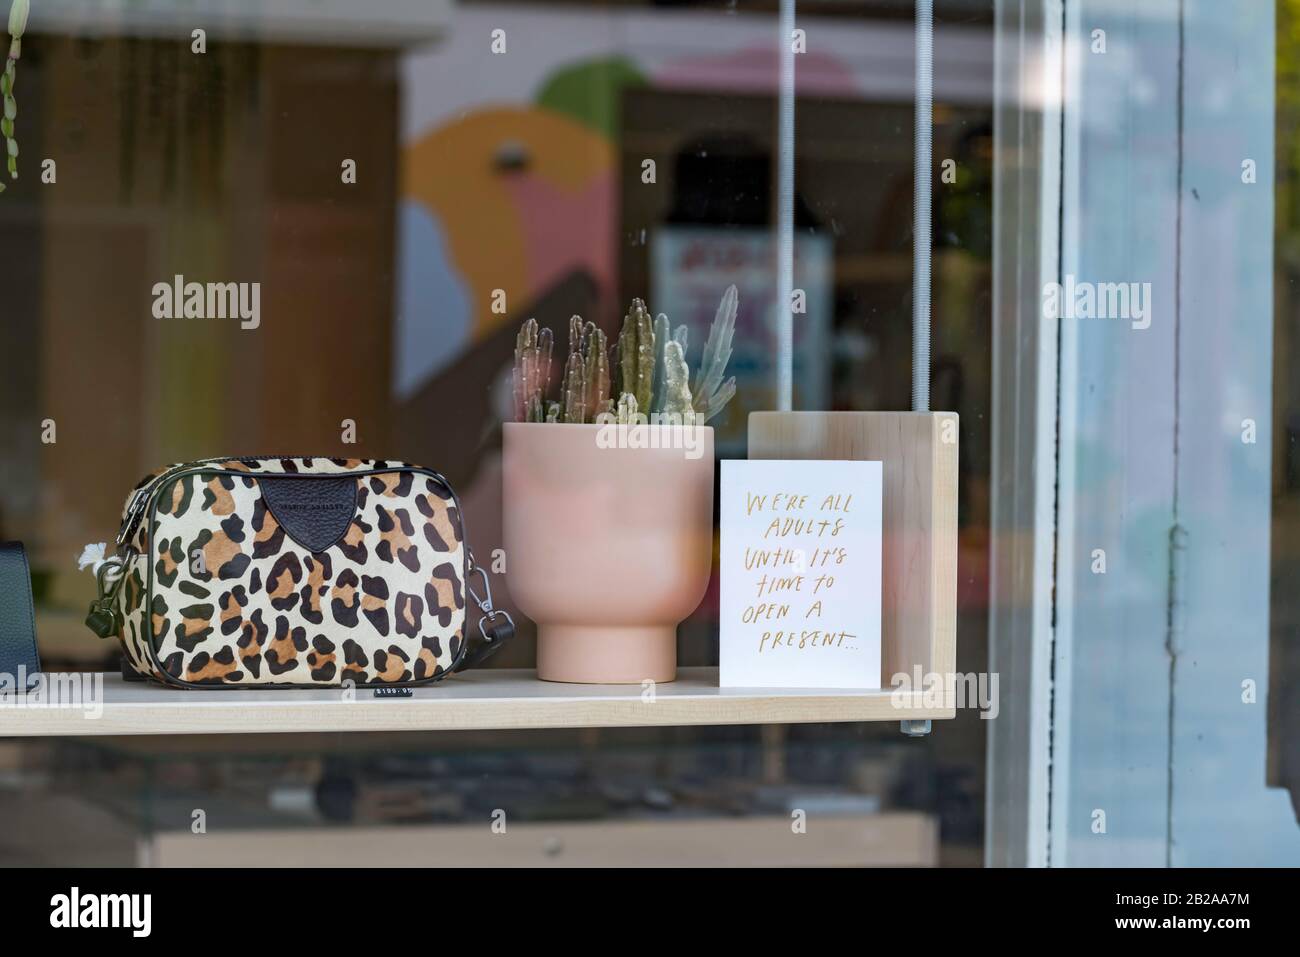 A leopard skin purse and a humorous small Christmas sign in a store window in Fitzroy, Melbourne, Australia Stock Photo